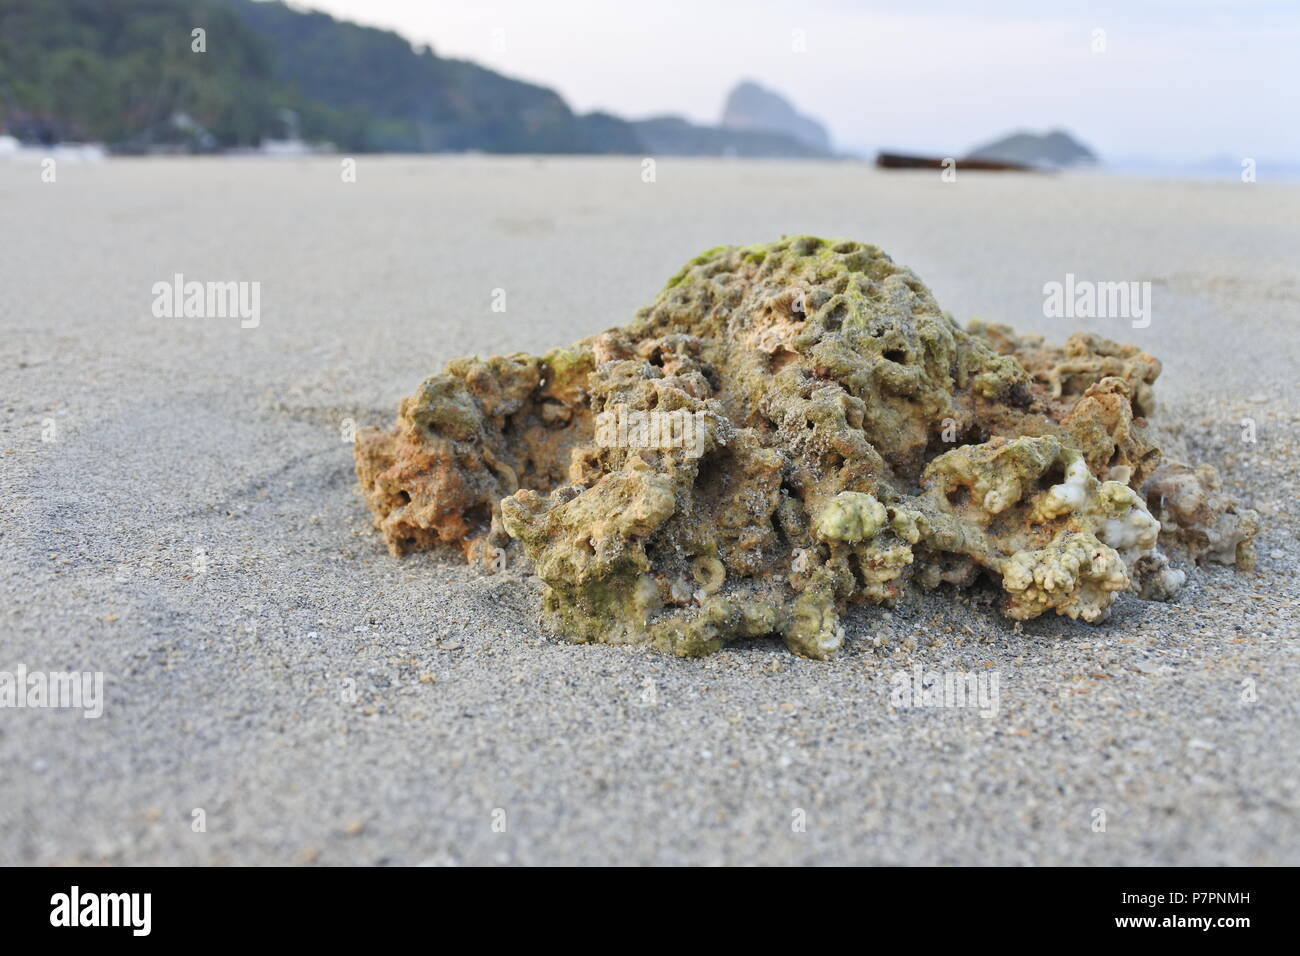 A stunning coral adorned with vibrant moss steals the spotlight on the sandy beach, creating a captivating coastal allure. Stock Photo